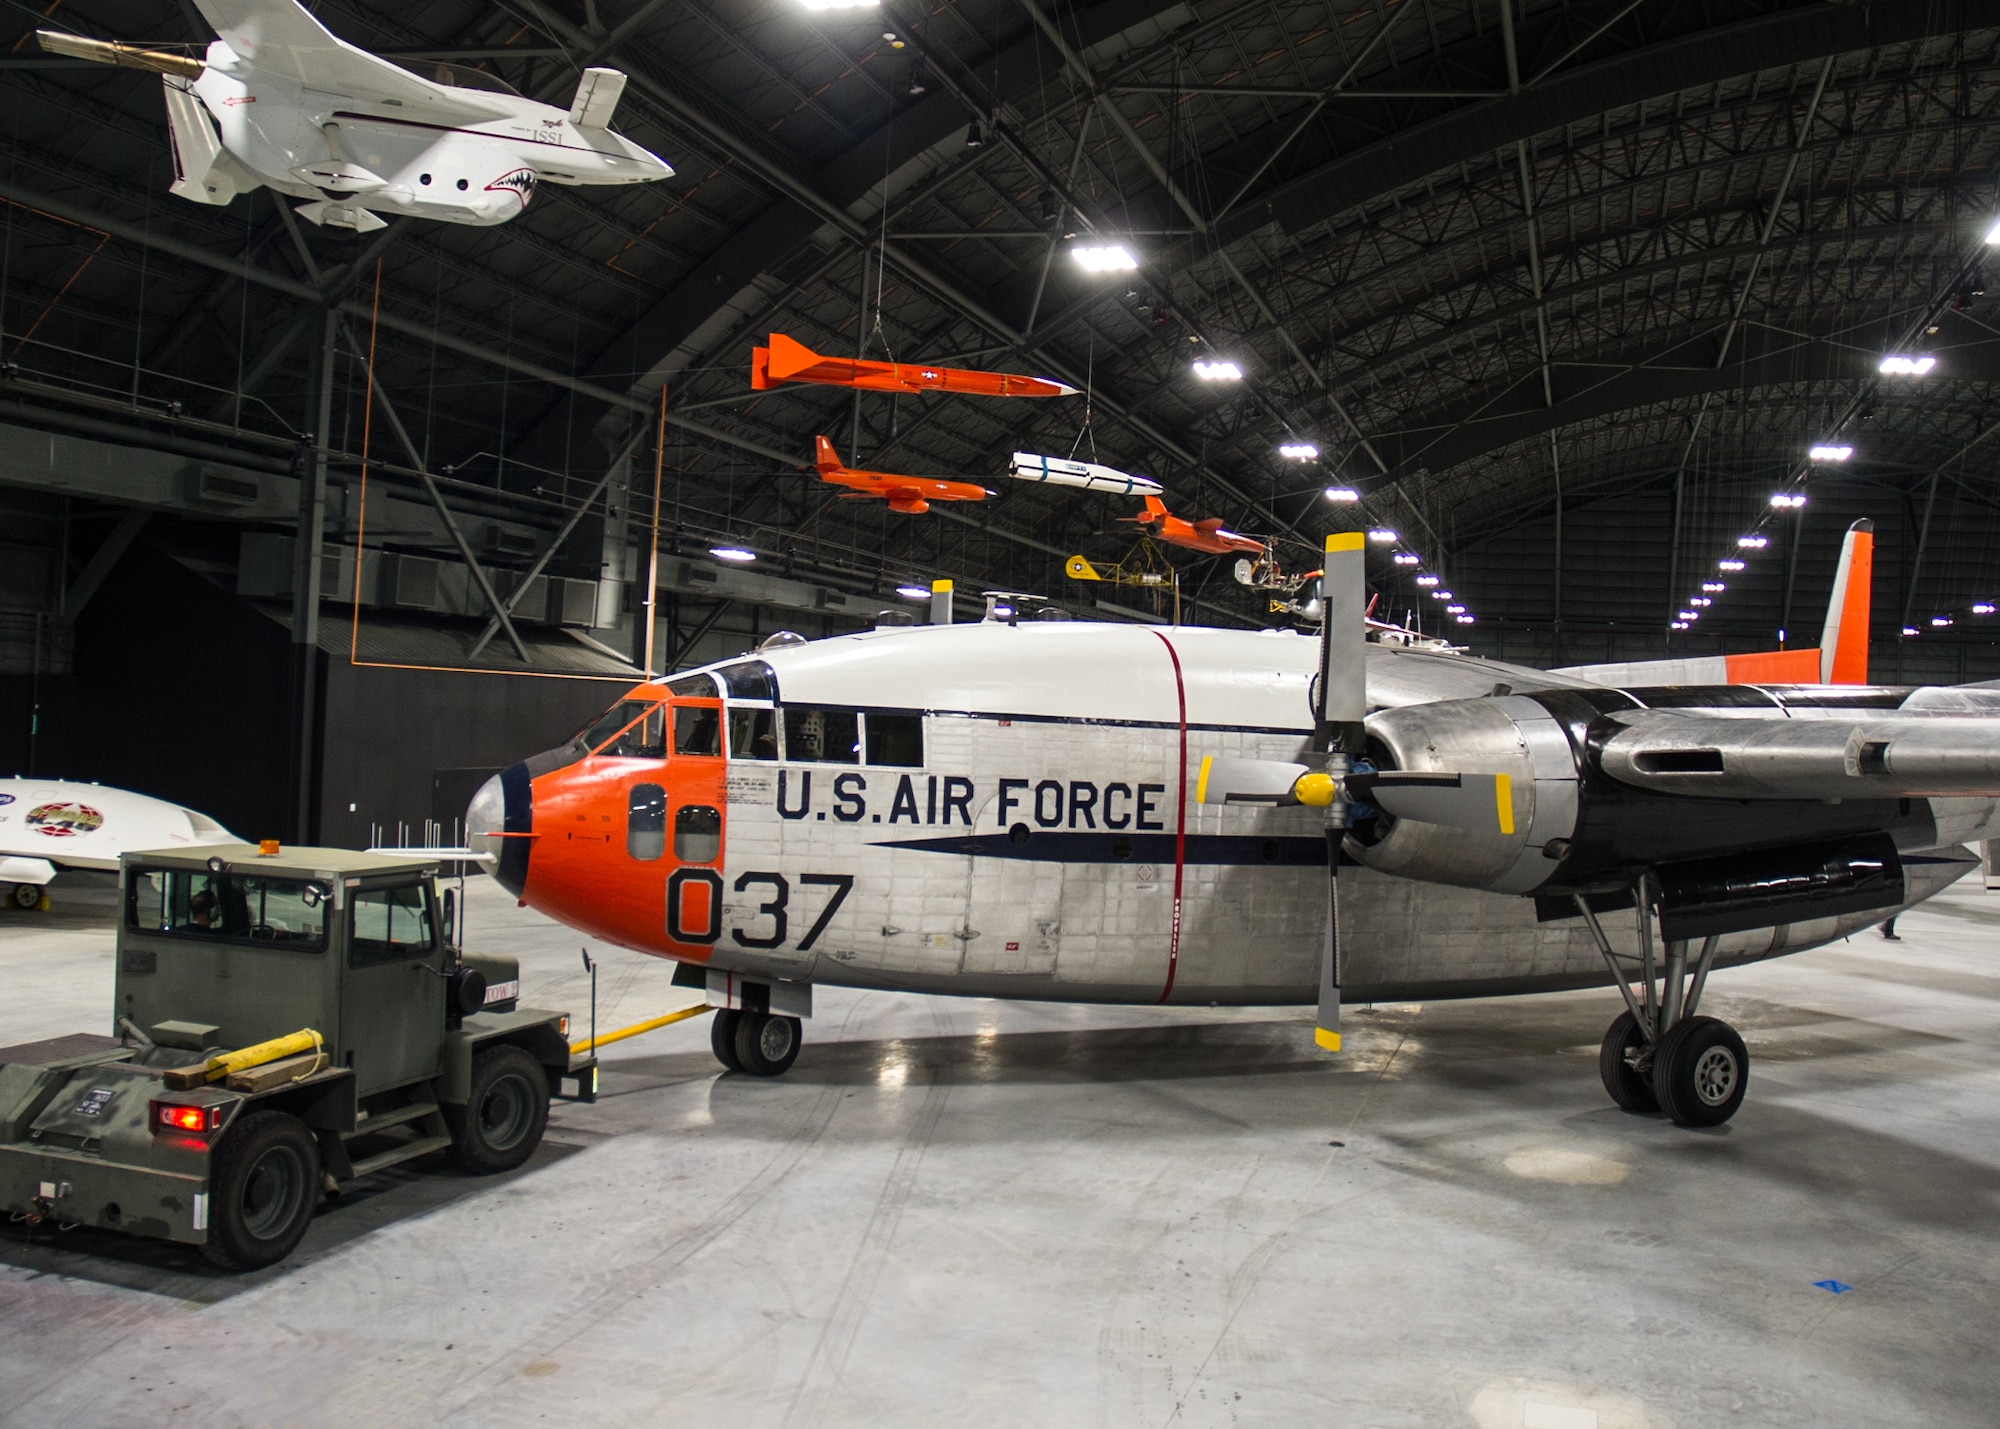 DAYTON, Ohio -- Fairchild C-119J Flying Boxcar being moved into the Space Gallery at the National Museum of the United States Air Force on April 5, 2016. (U.S. Air Force photo by Ken LaRock)